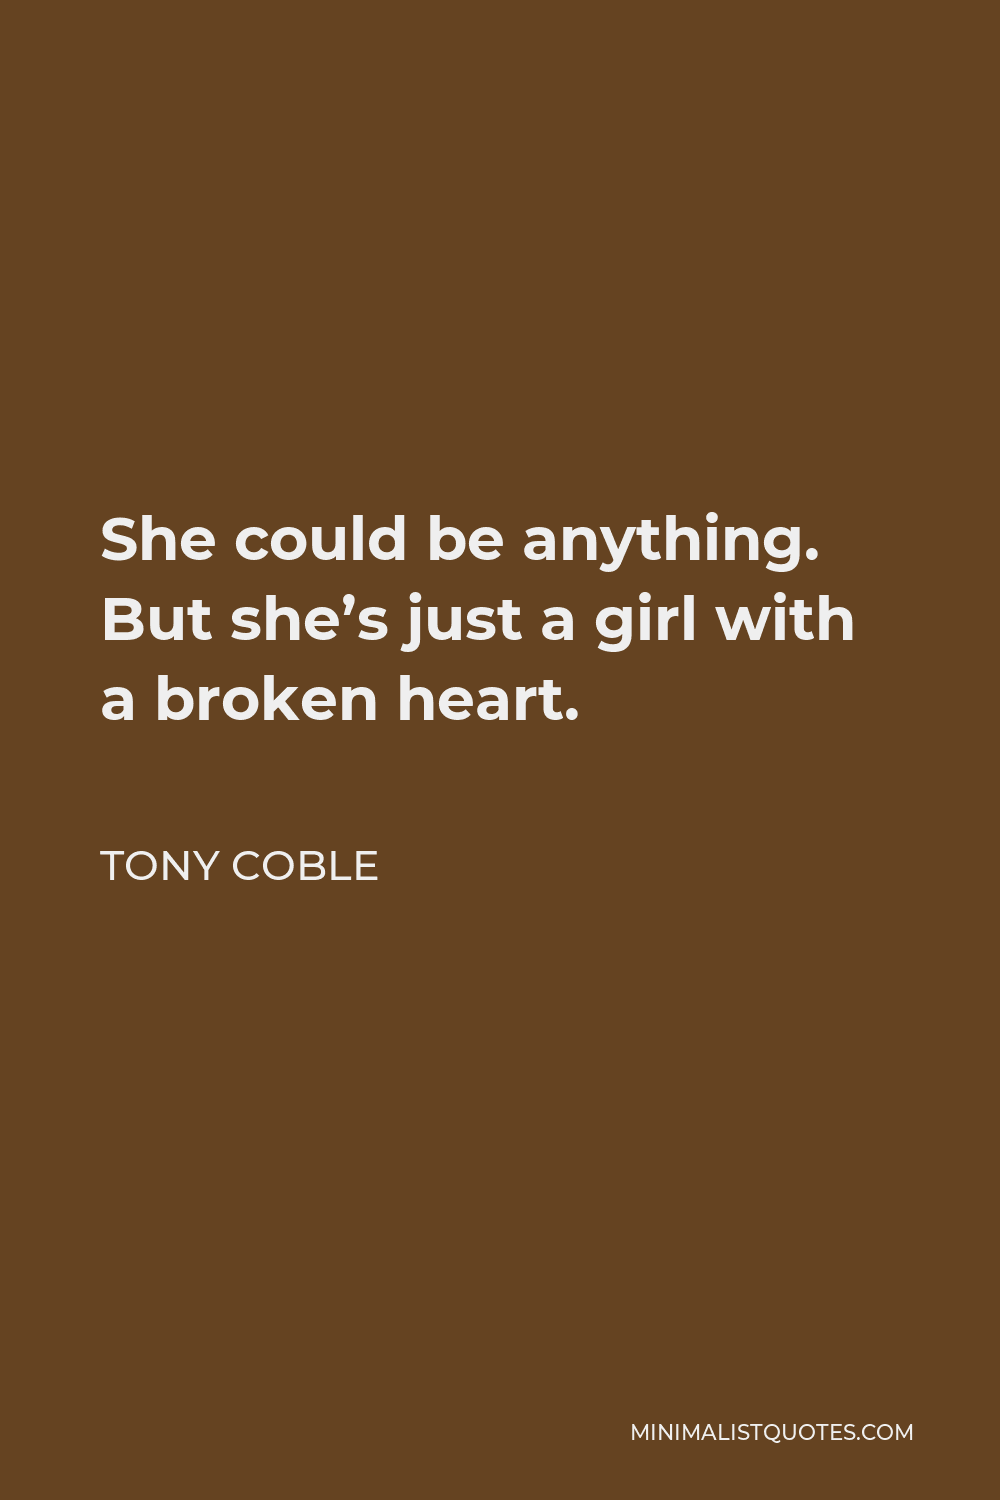 Tony Coble Quote - She could be anything. But she’s just a girl with a broken heart.